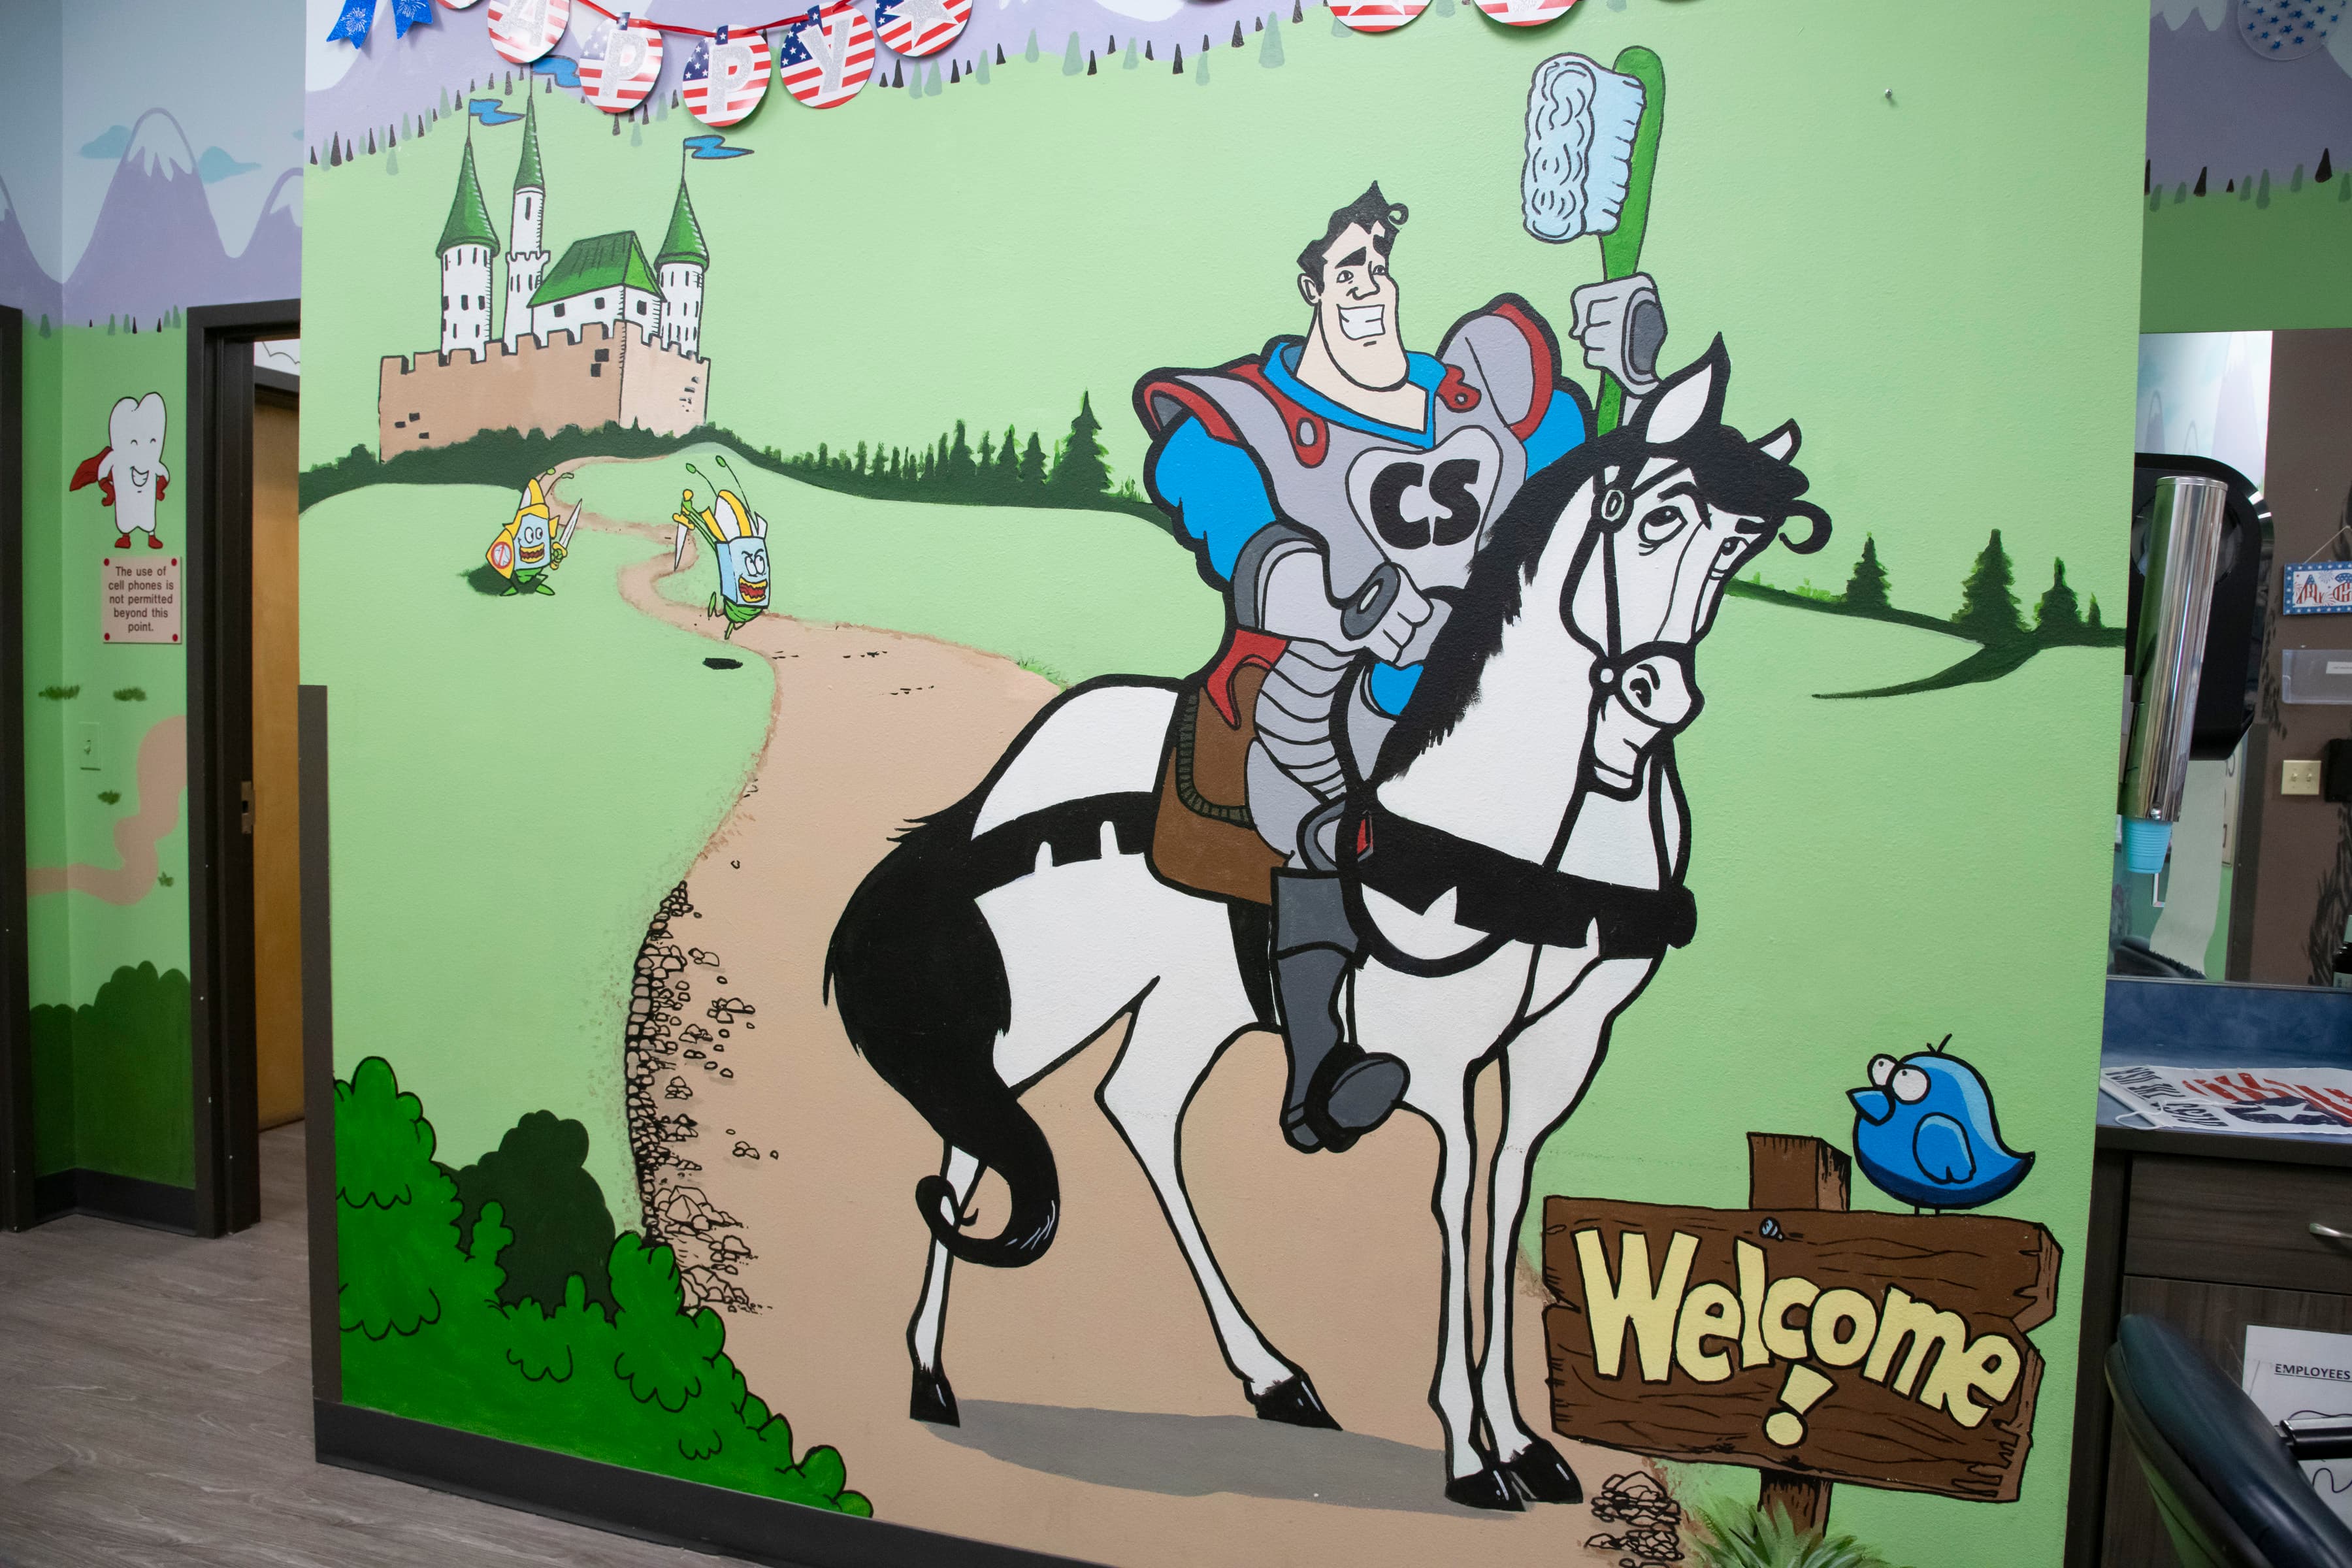 Graphics of Captain Smiles riding a horse and holding a toothbrush